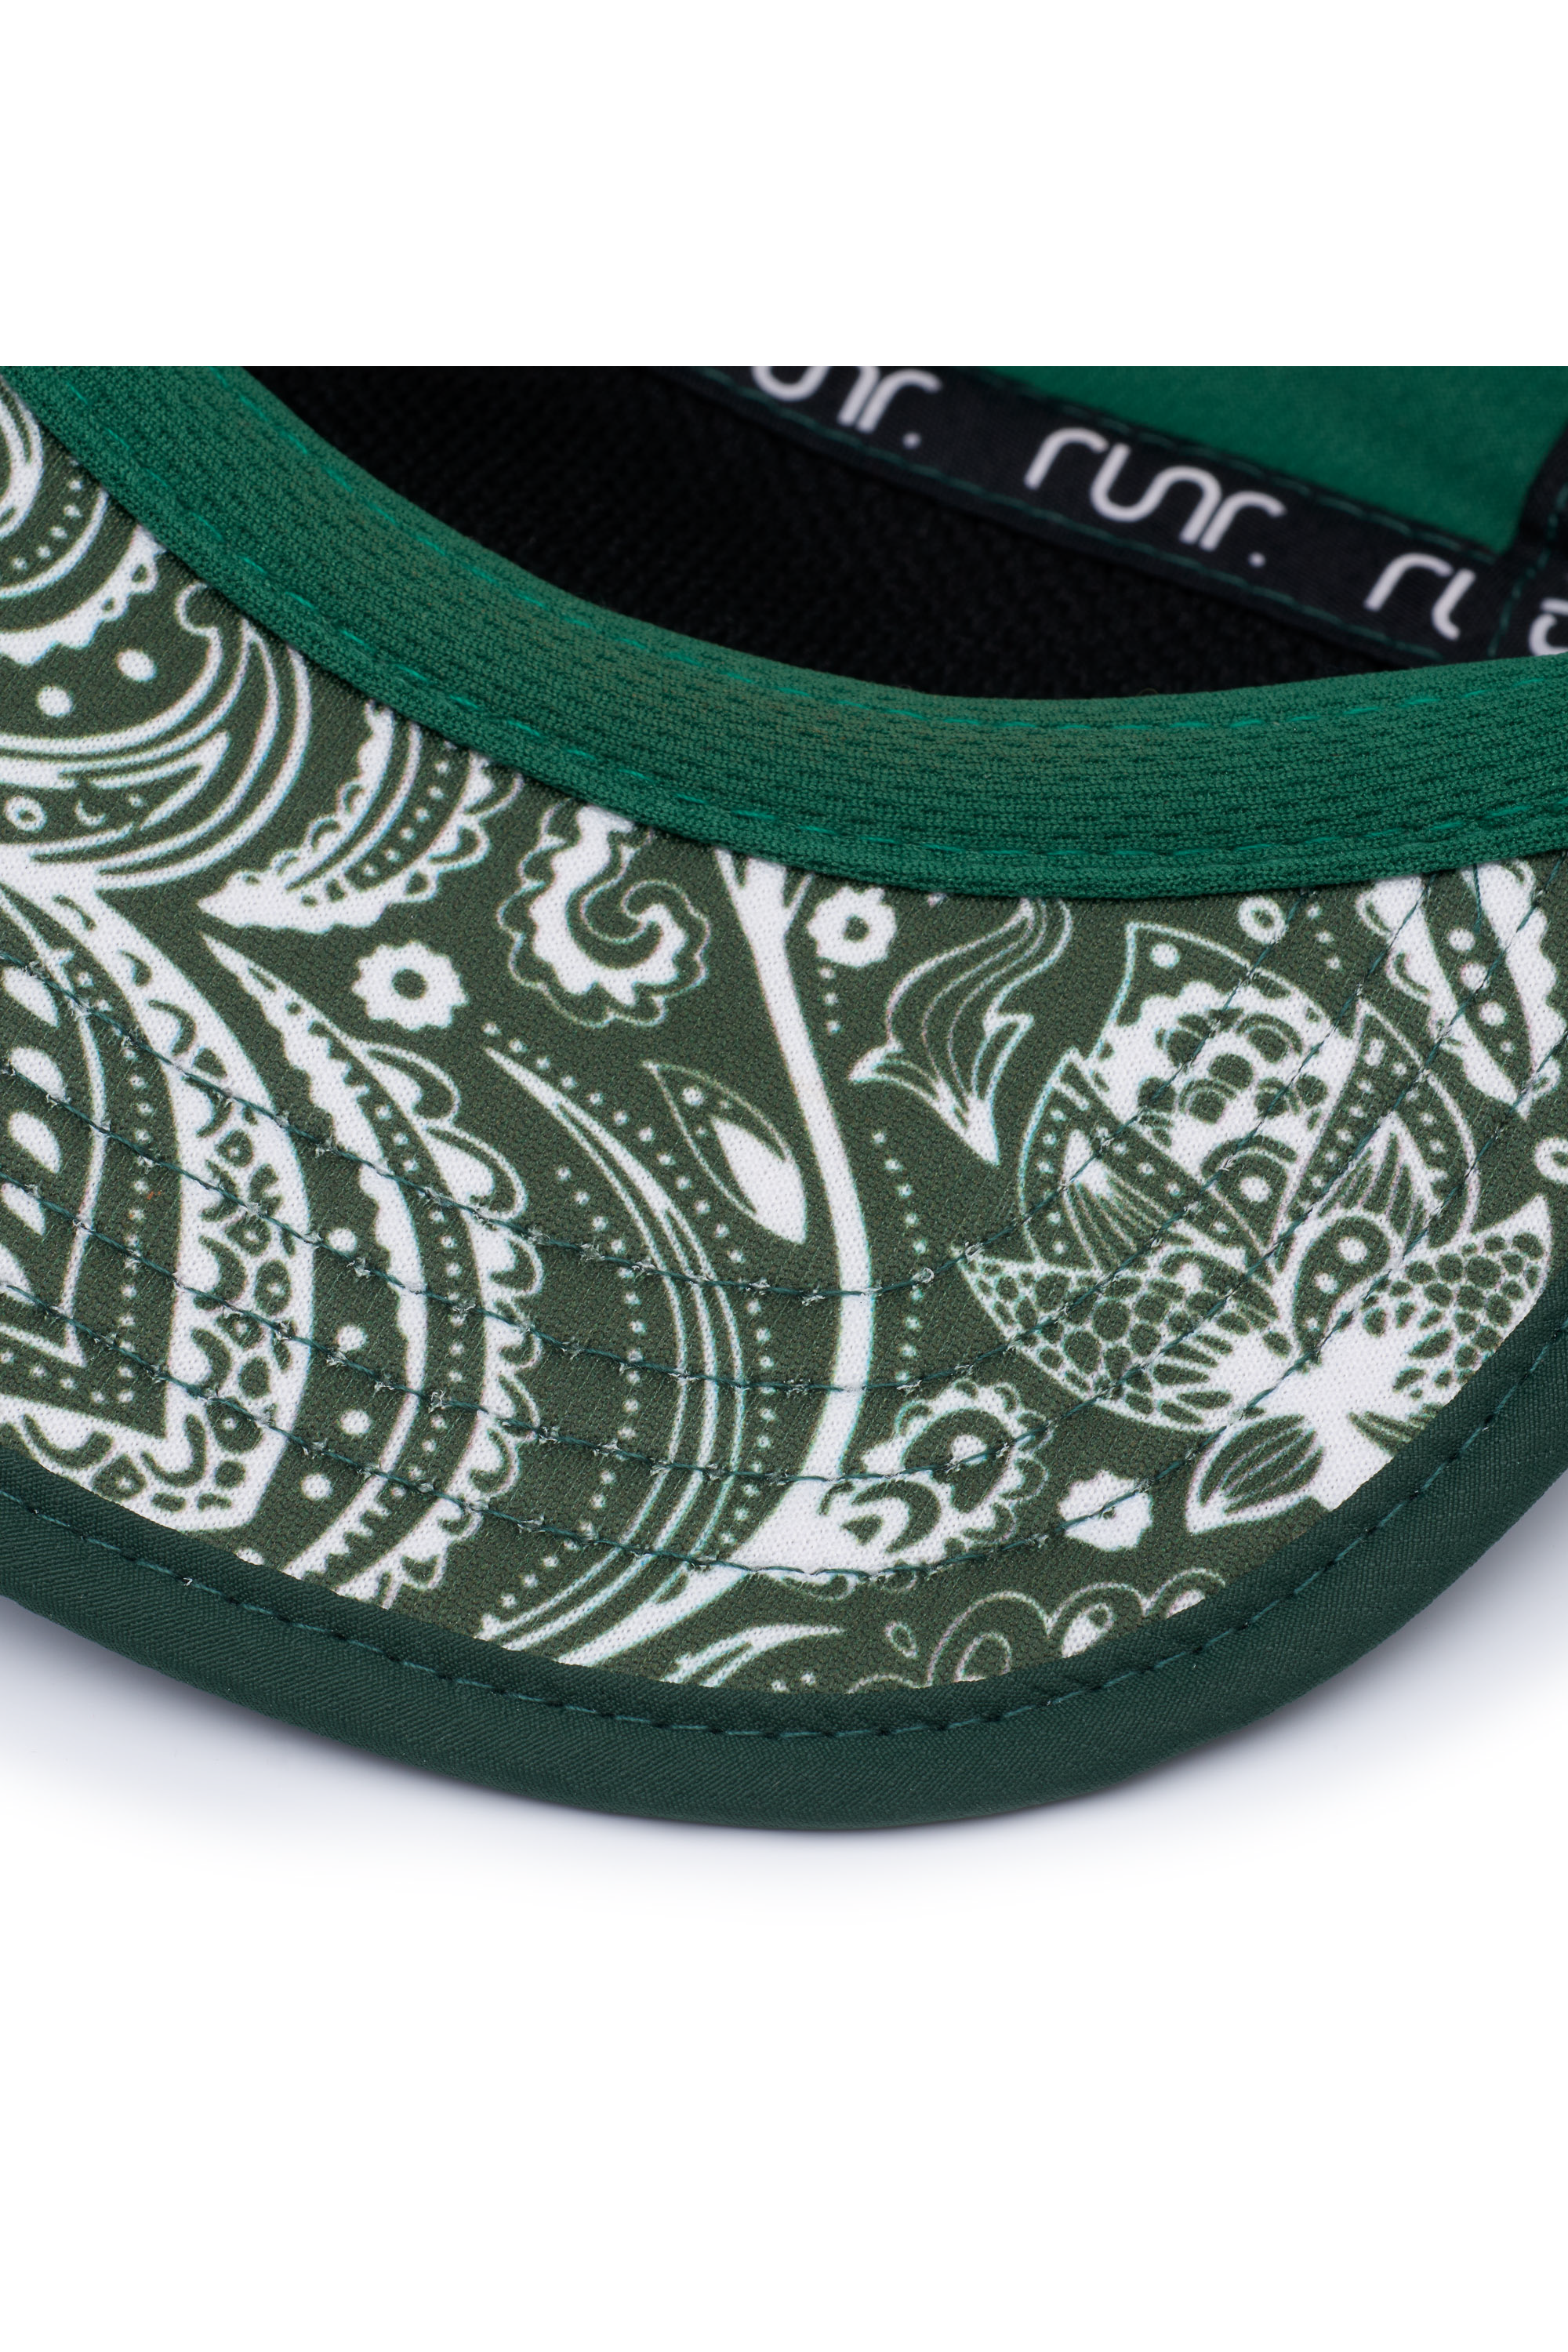 Runr 'Leave Nothing But Footprints' Technical Running Hat - Sole Mate